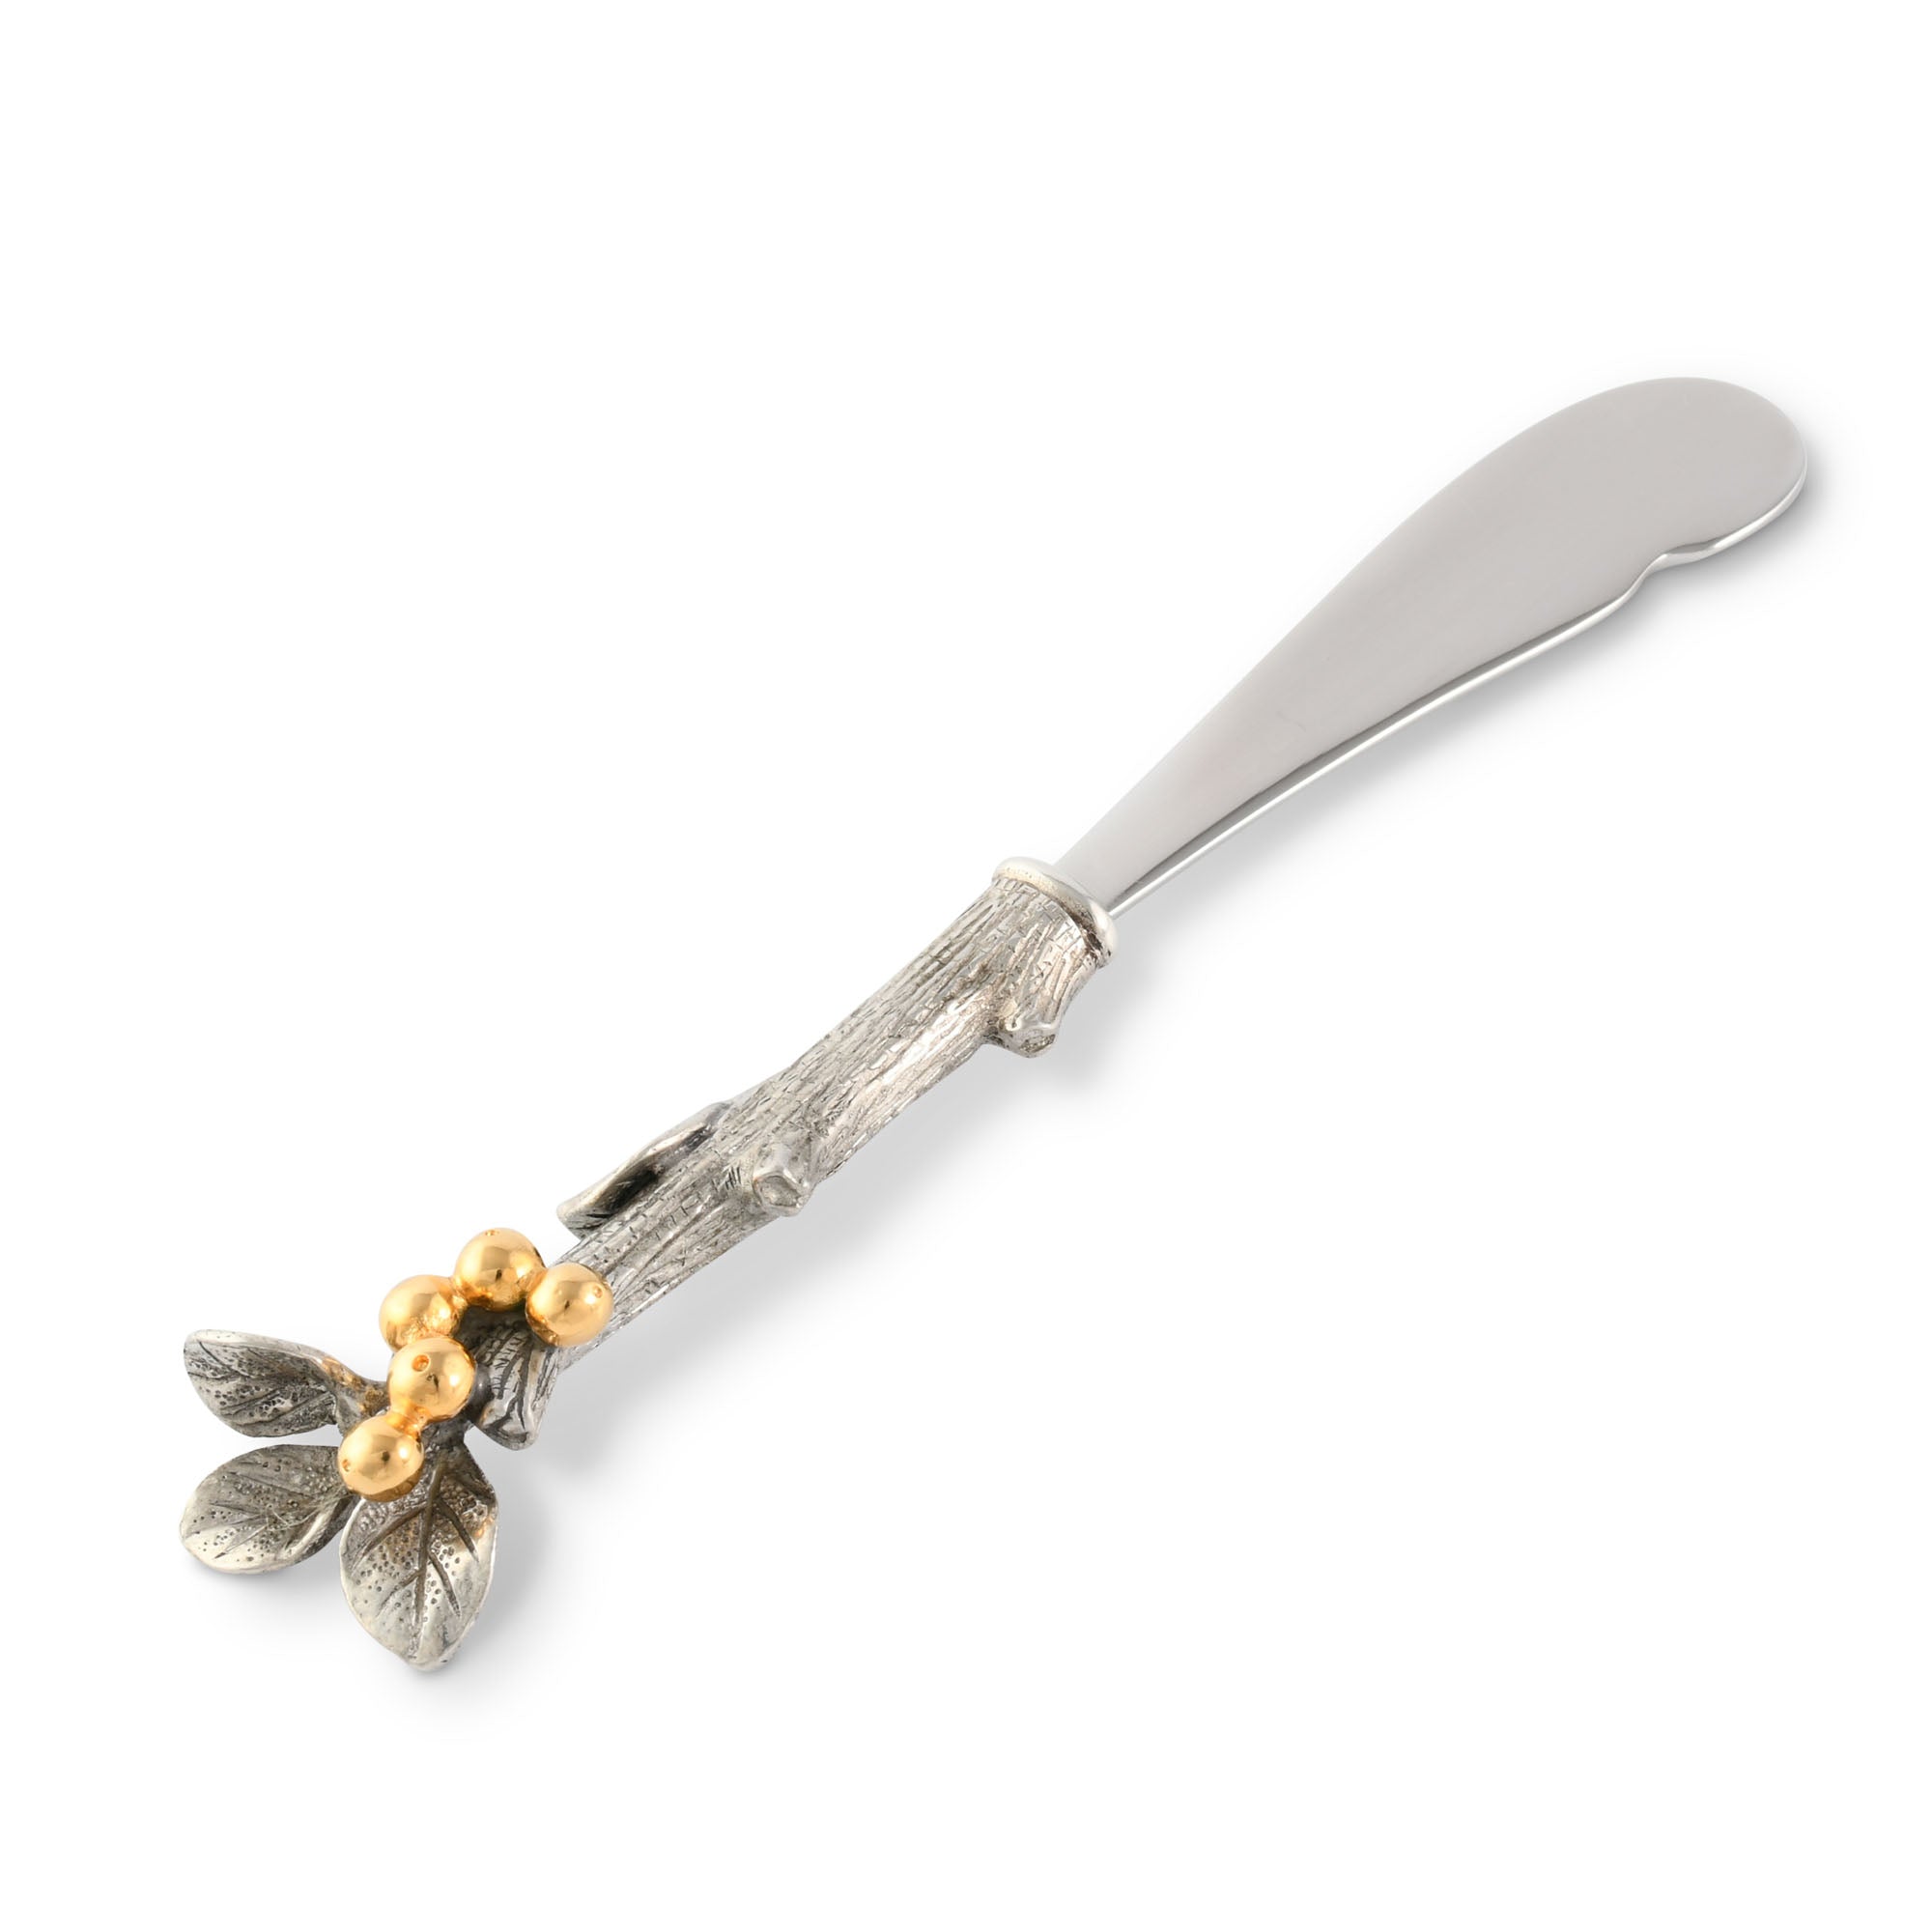 Vagabond House Winter Berry Spreader Product Image